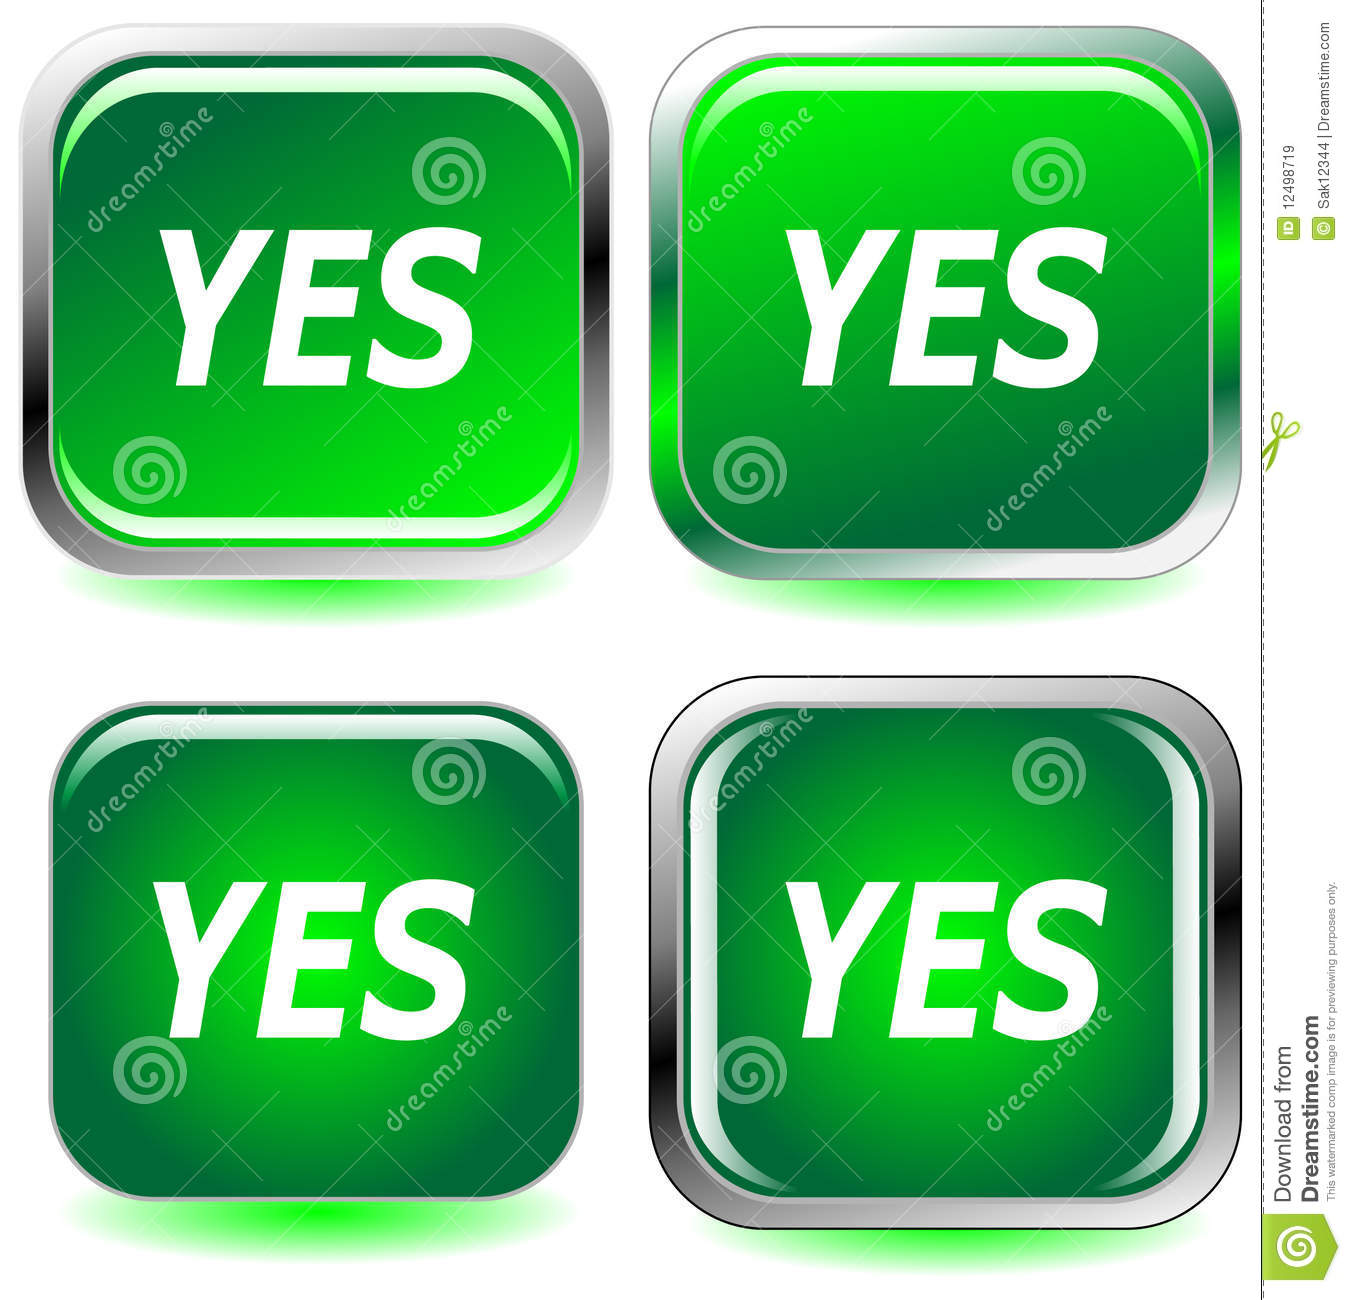 Free Website Buttons Icons Green